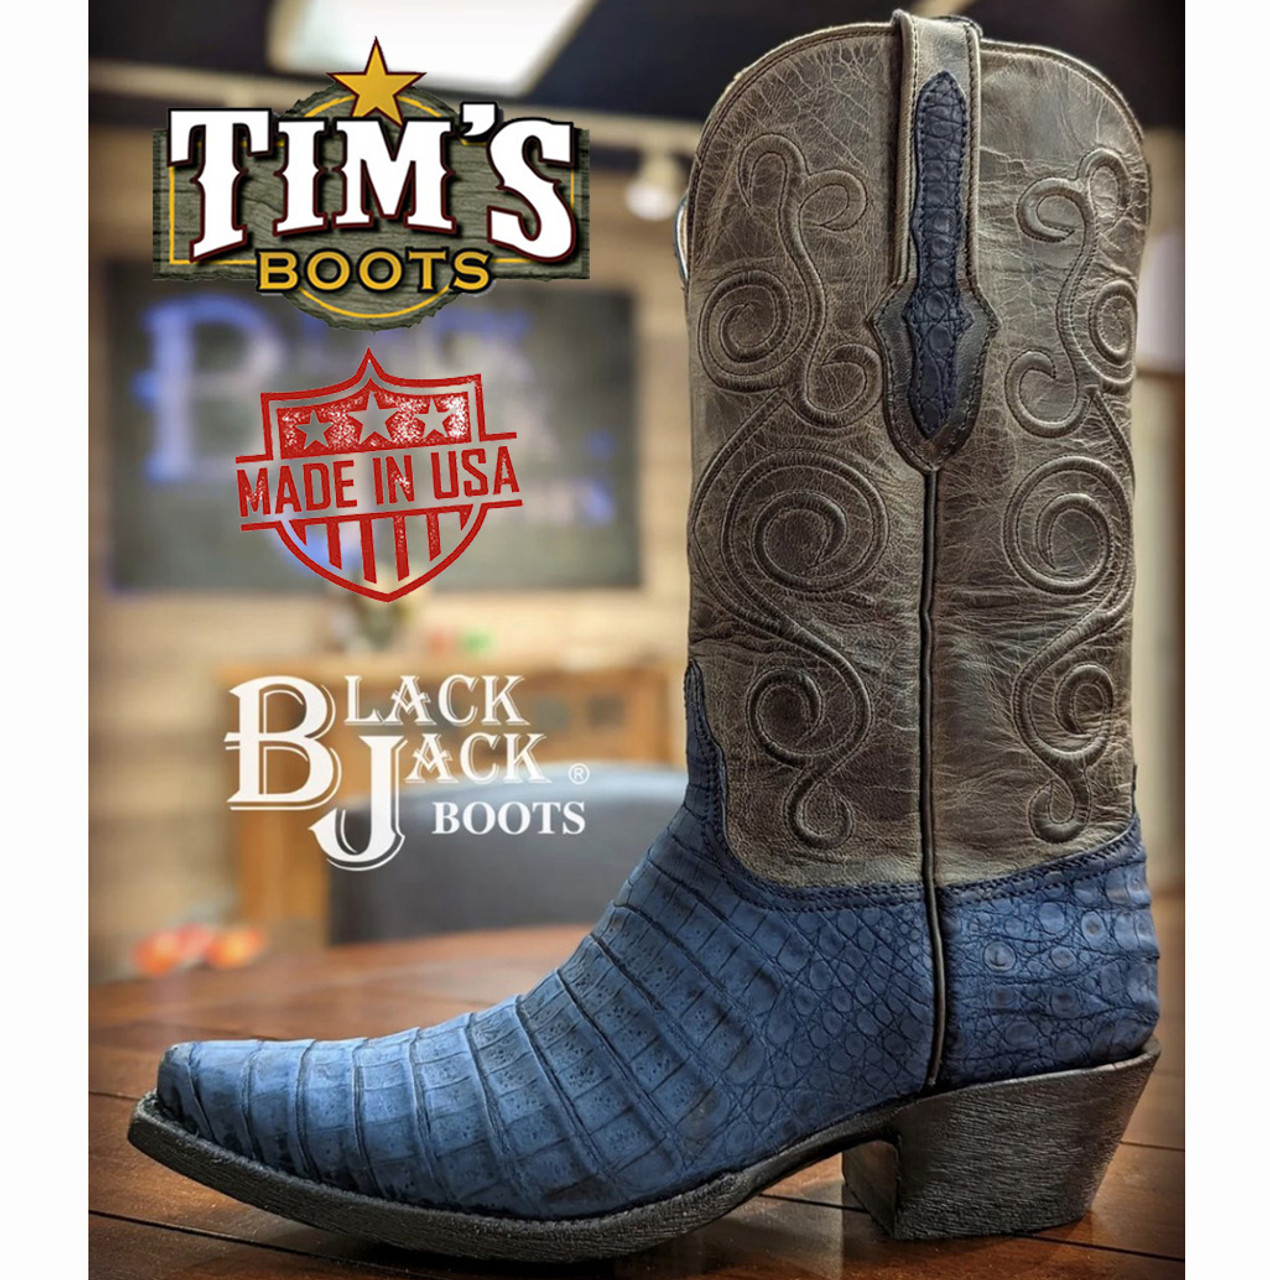 Caiman vs. Alligator Cowboy Boots: What are the Differences? - Tim's Boots